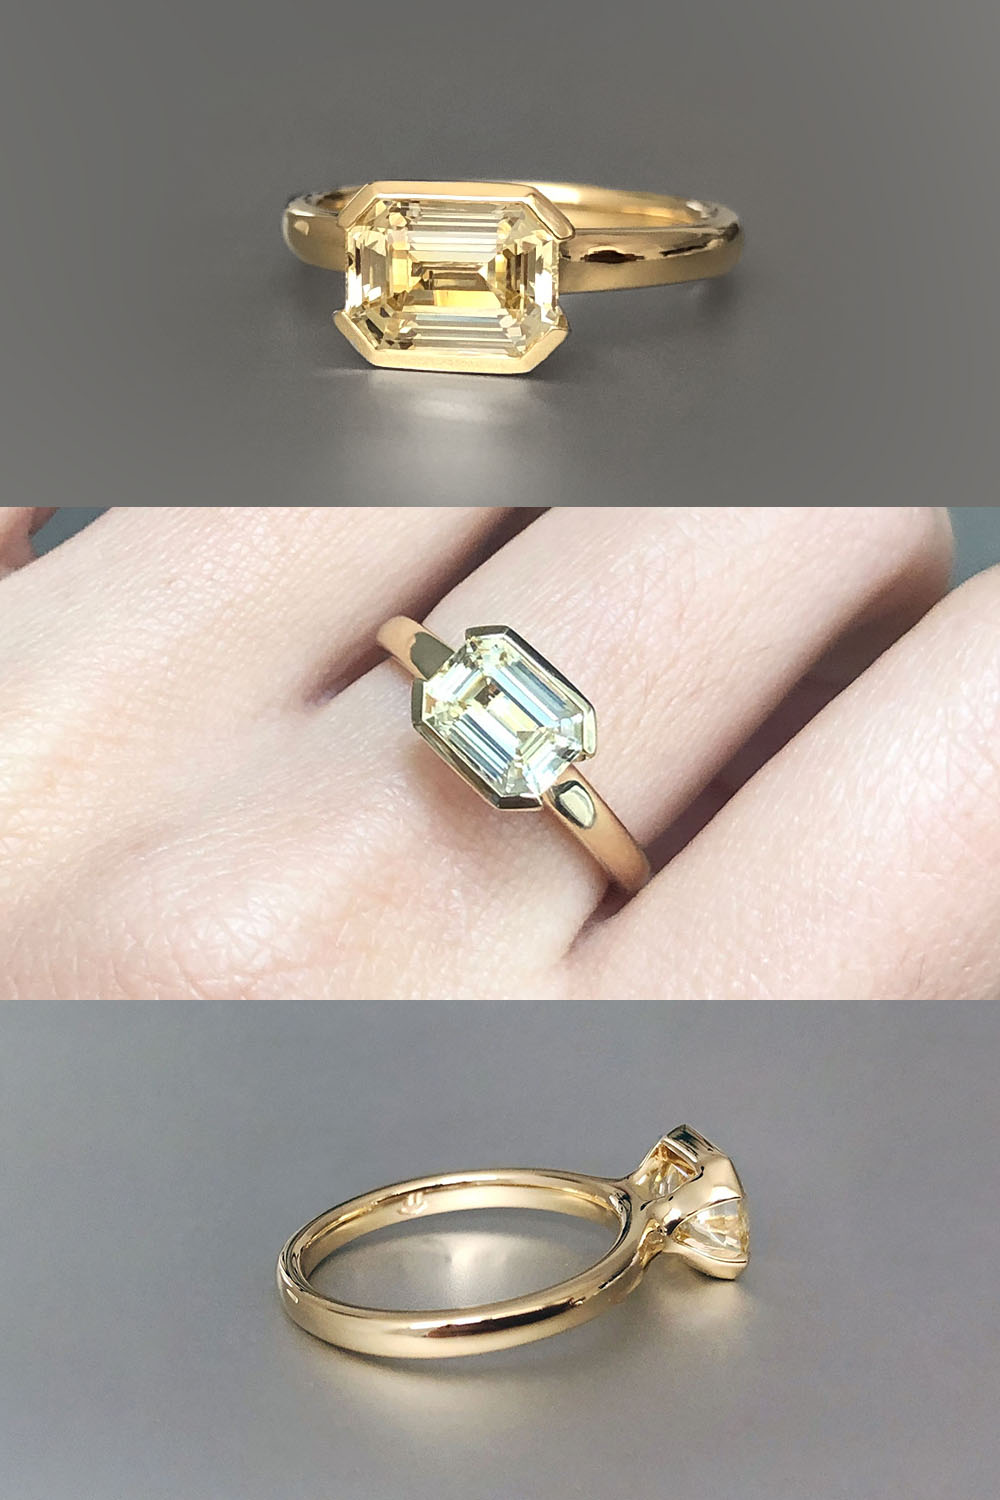 Emerald cut sapphire ring in yellow gold